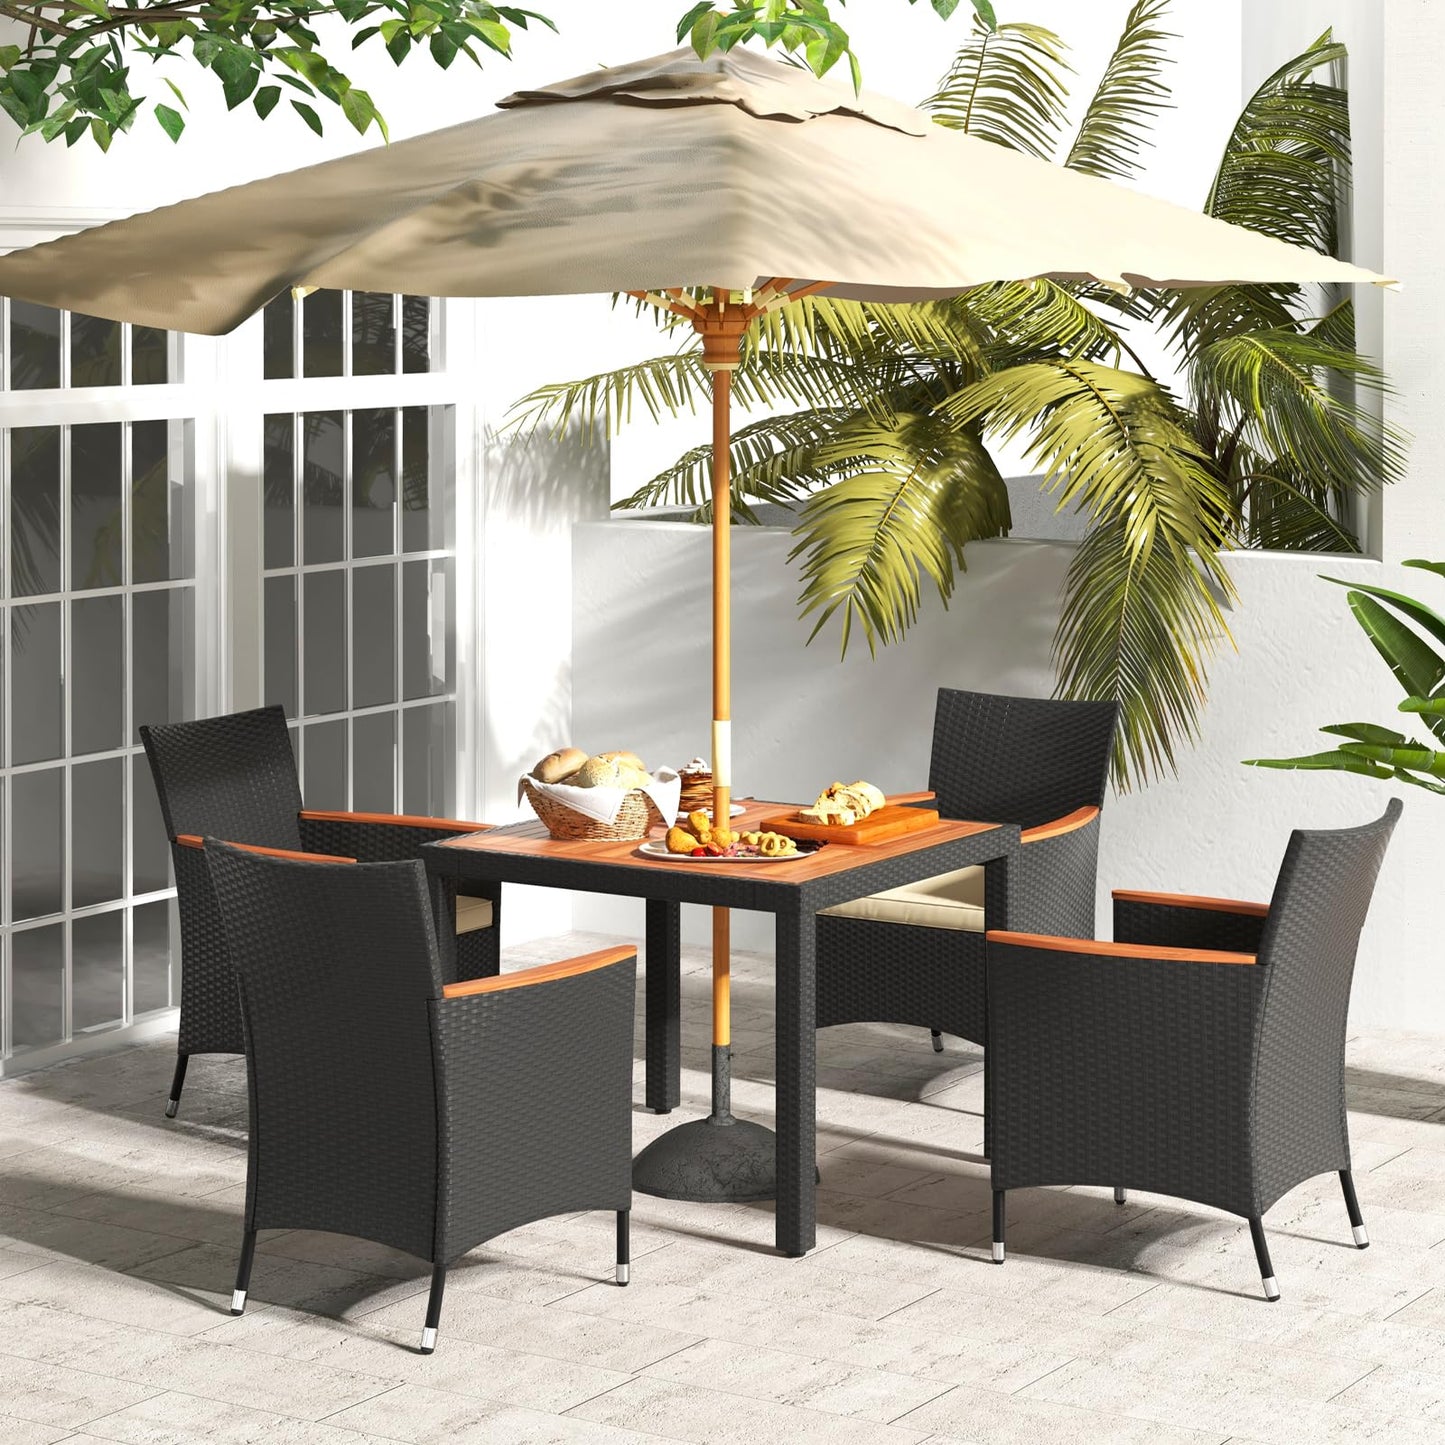 Tangkula 5 Pieces Patio Dining Table Set for 4, Rattan Conversation Set with Umbrella Hole, Seat Cushions & Acacia Wood Tabletop, Outdoor Dining Table with 4 Chairs for Backyard, Poolside & Deck